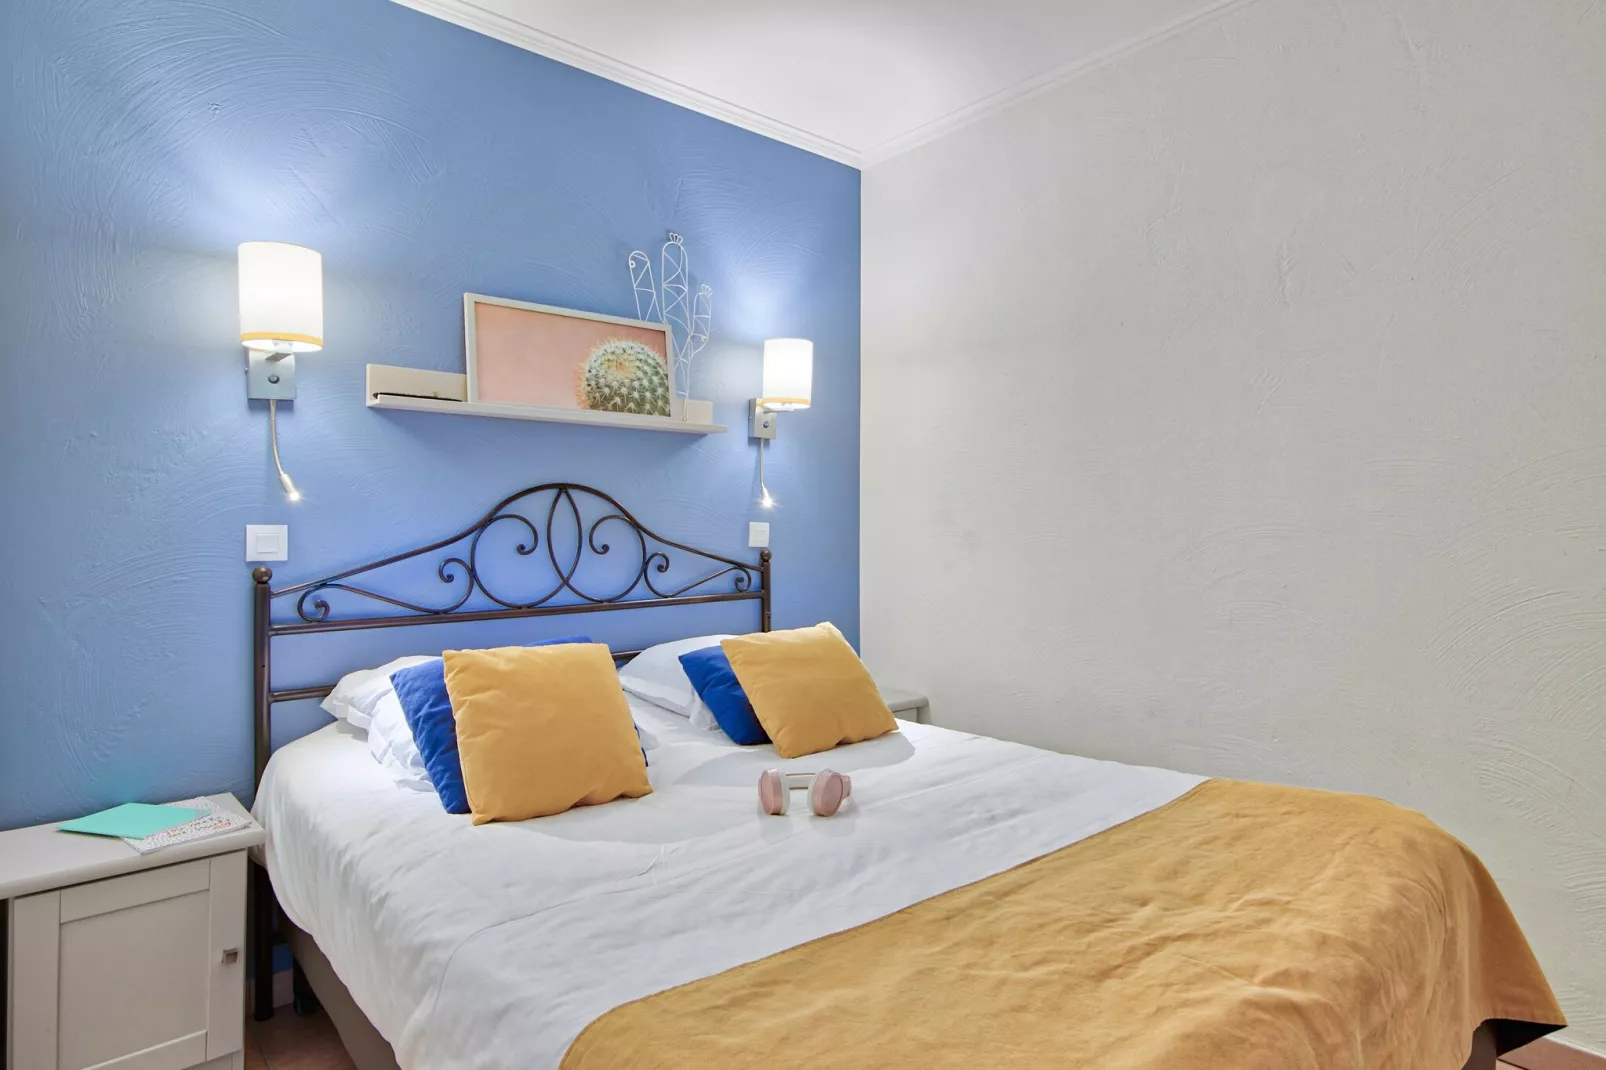 Residence Les Calanques, Les Issambres-27 Standard - Apt. 6 p. - 1 bedroom+1 sleeping alcove - terrace